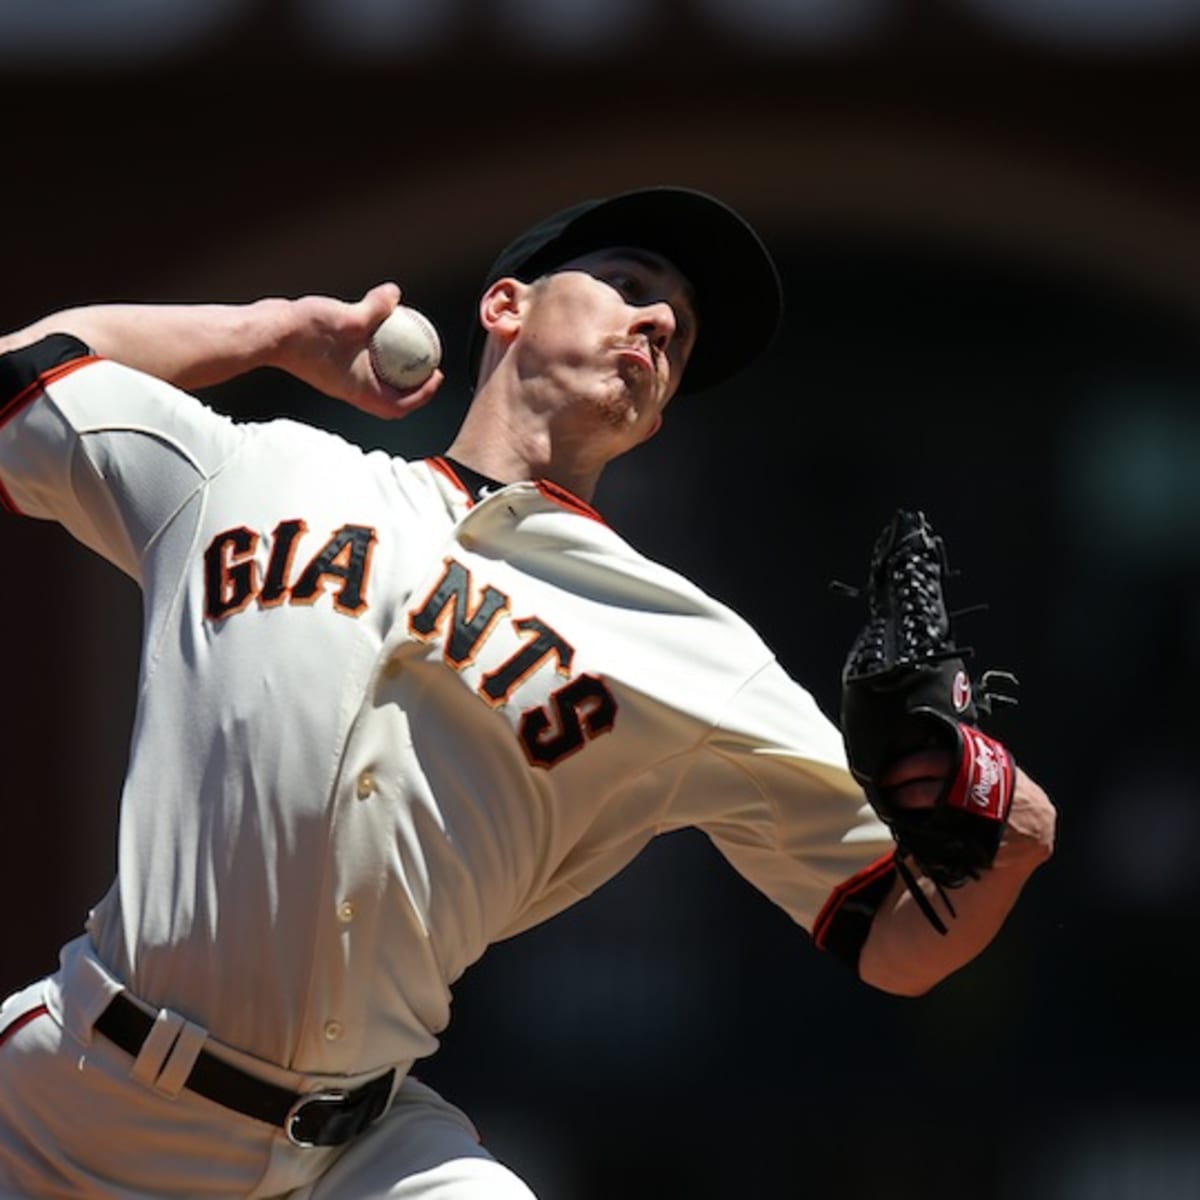 Report: Former Giants great Tim Lincecum close to signing with Rangers